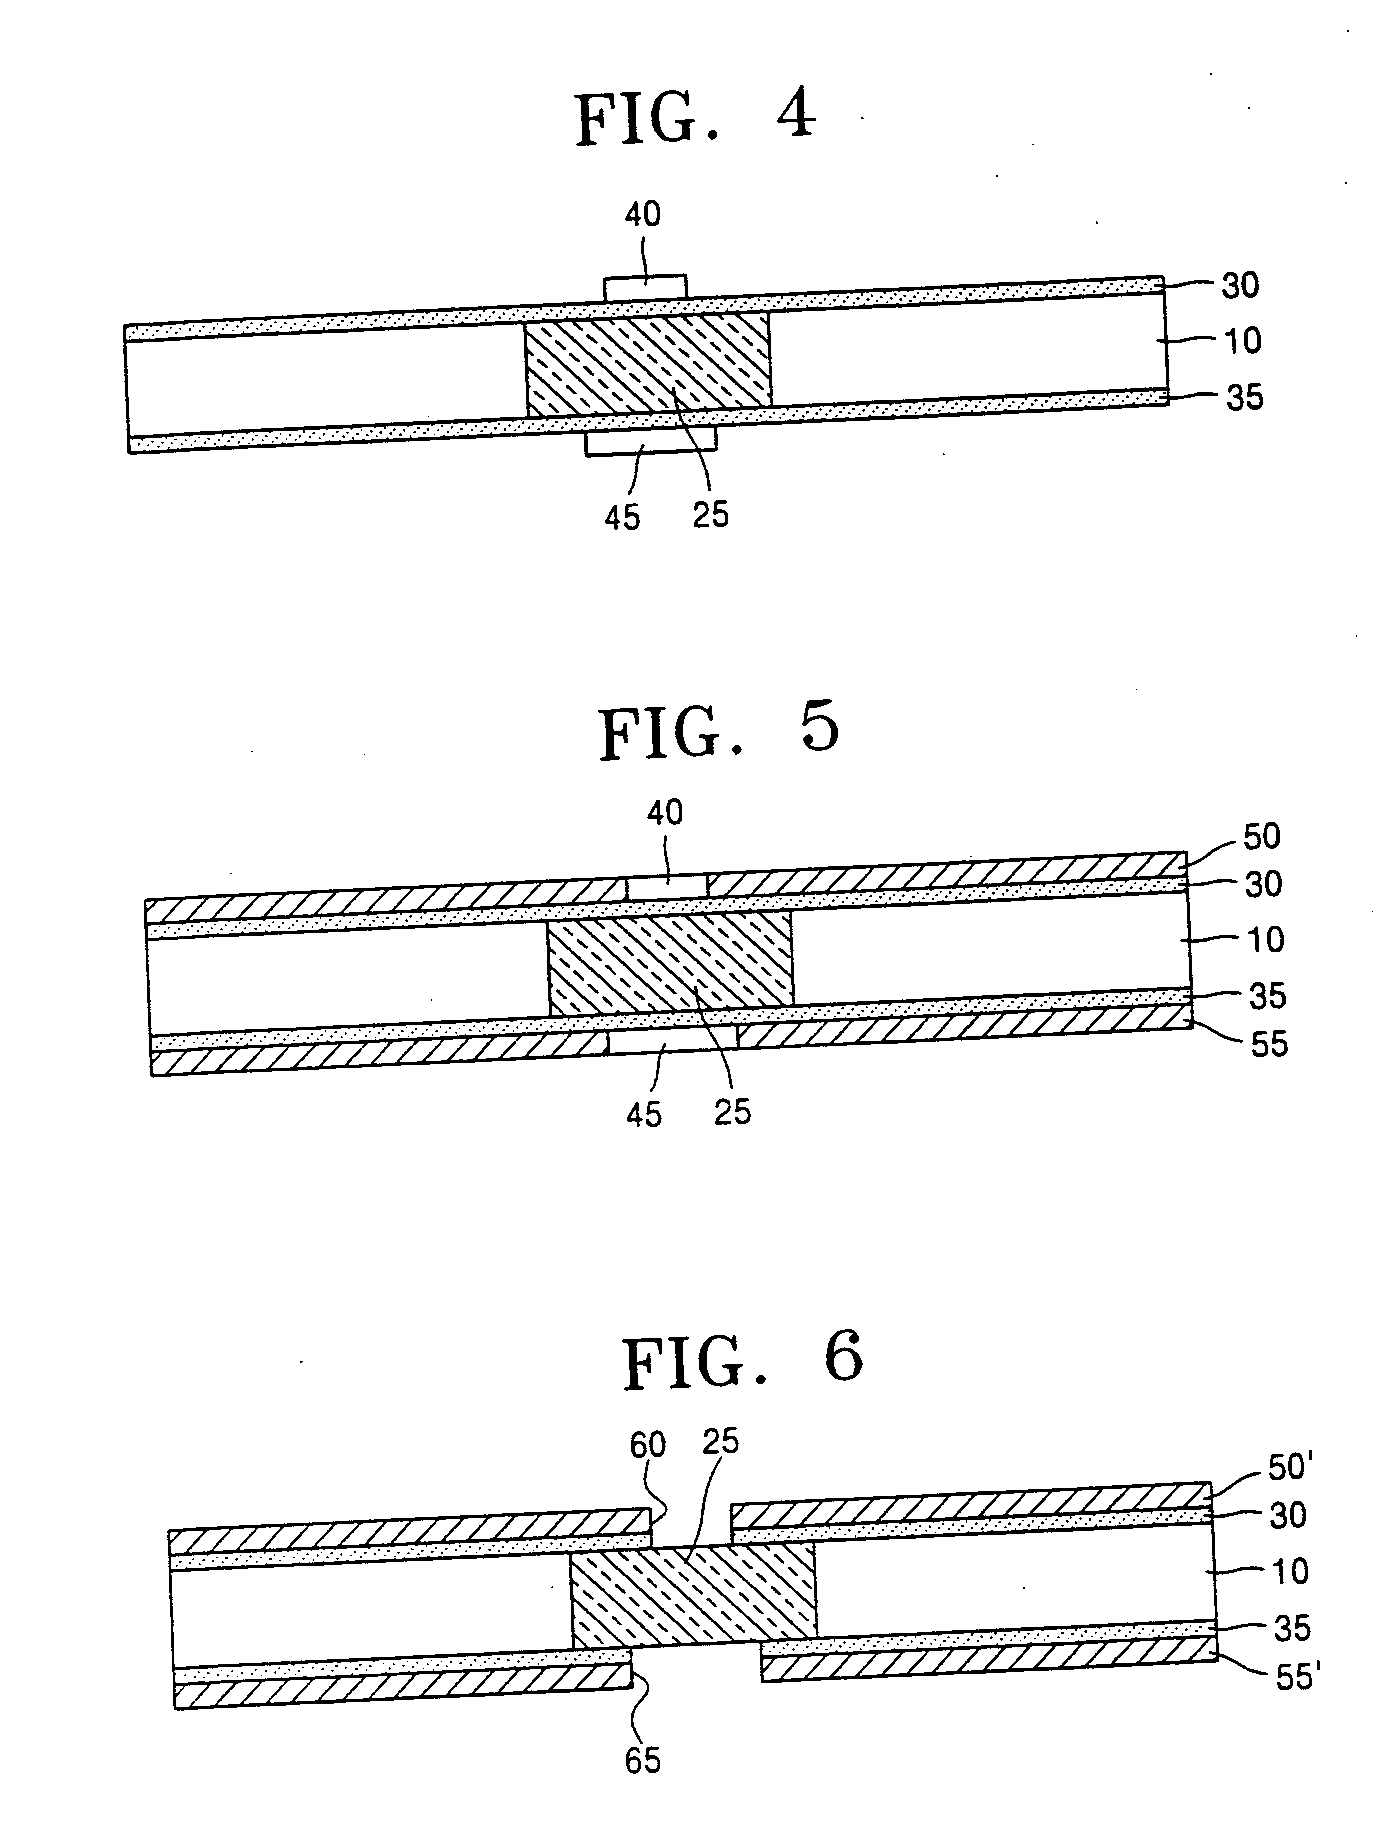 Electron beam lens for micro-column electron beam apparatus and method of fabricating the same